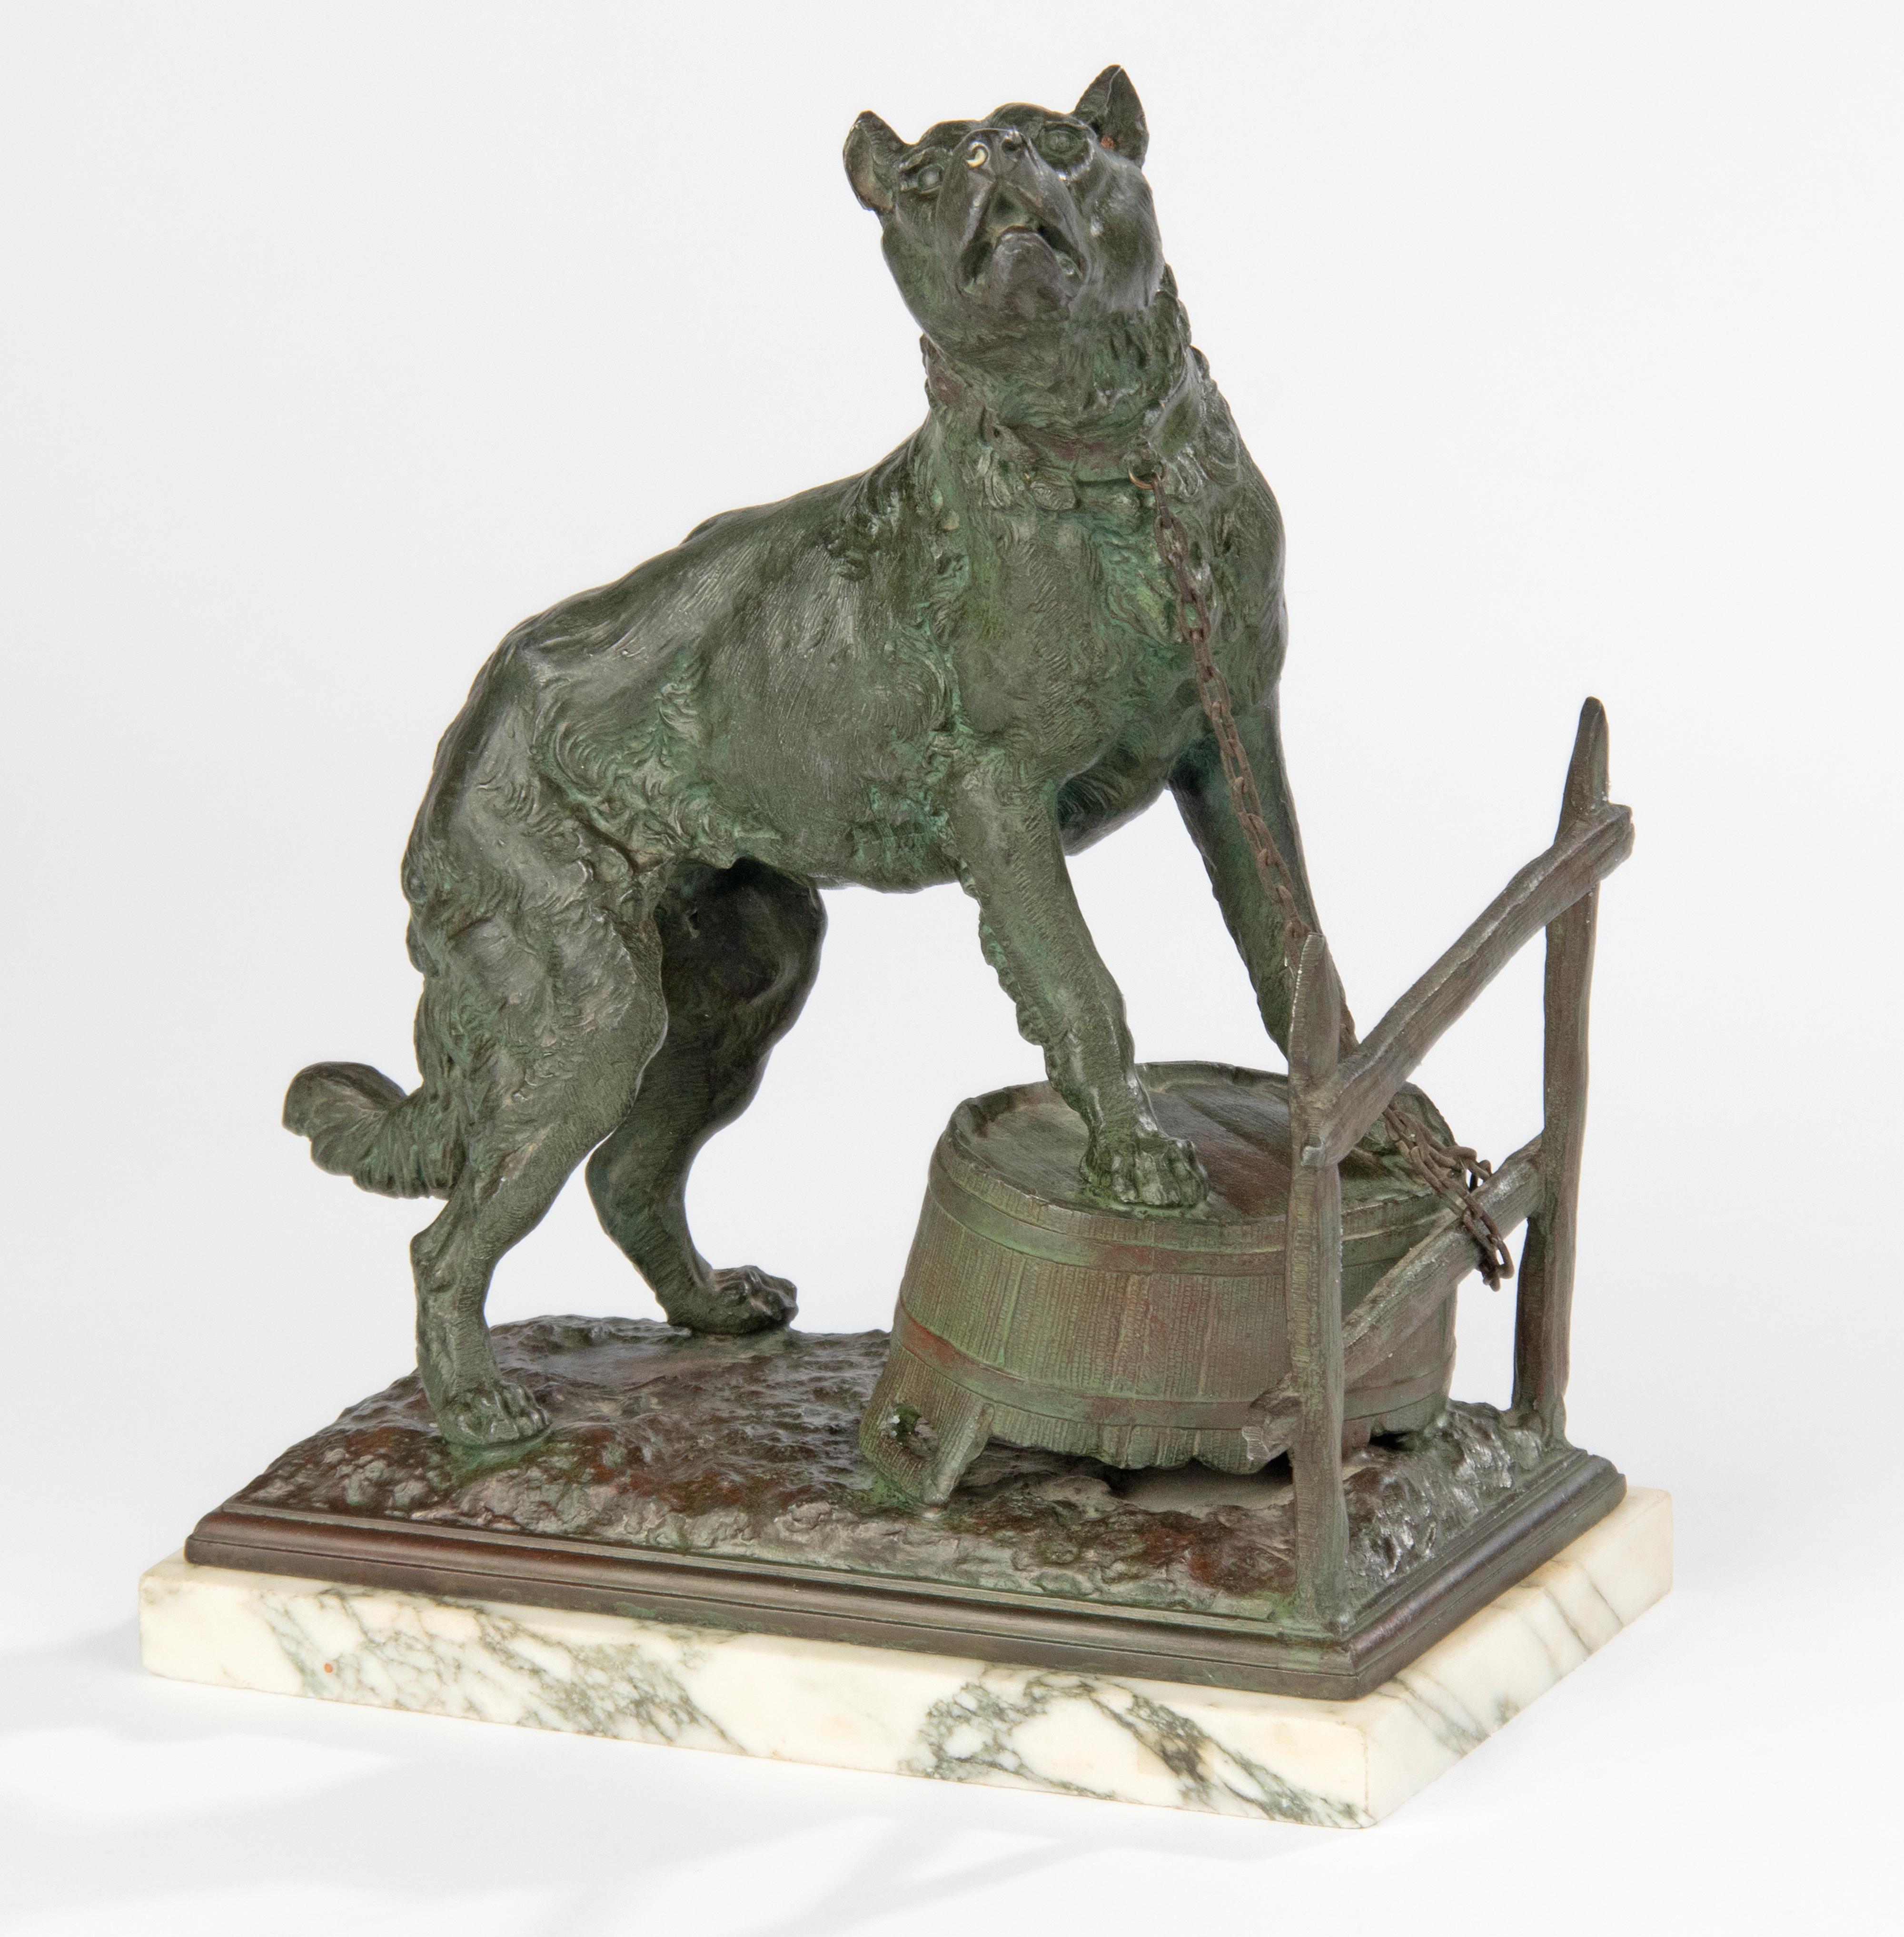 An antique sculpture (zink alloy) of a guard dog - a Staffordshire Terrier or Bandog type - guarding the property of its owner behind a wooden fence on a washing tub. The sculpture is made of green patinated zamac. On a green marble base. The